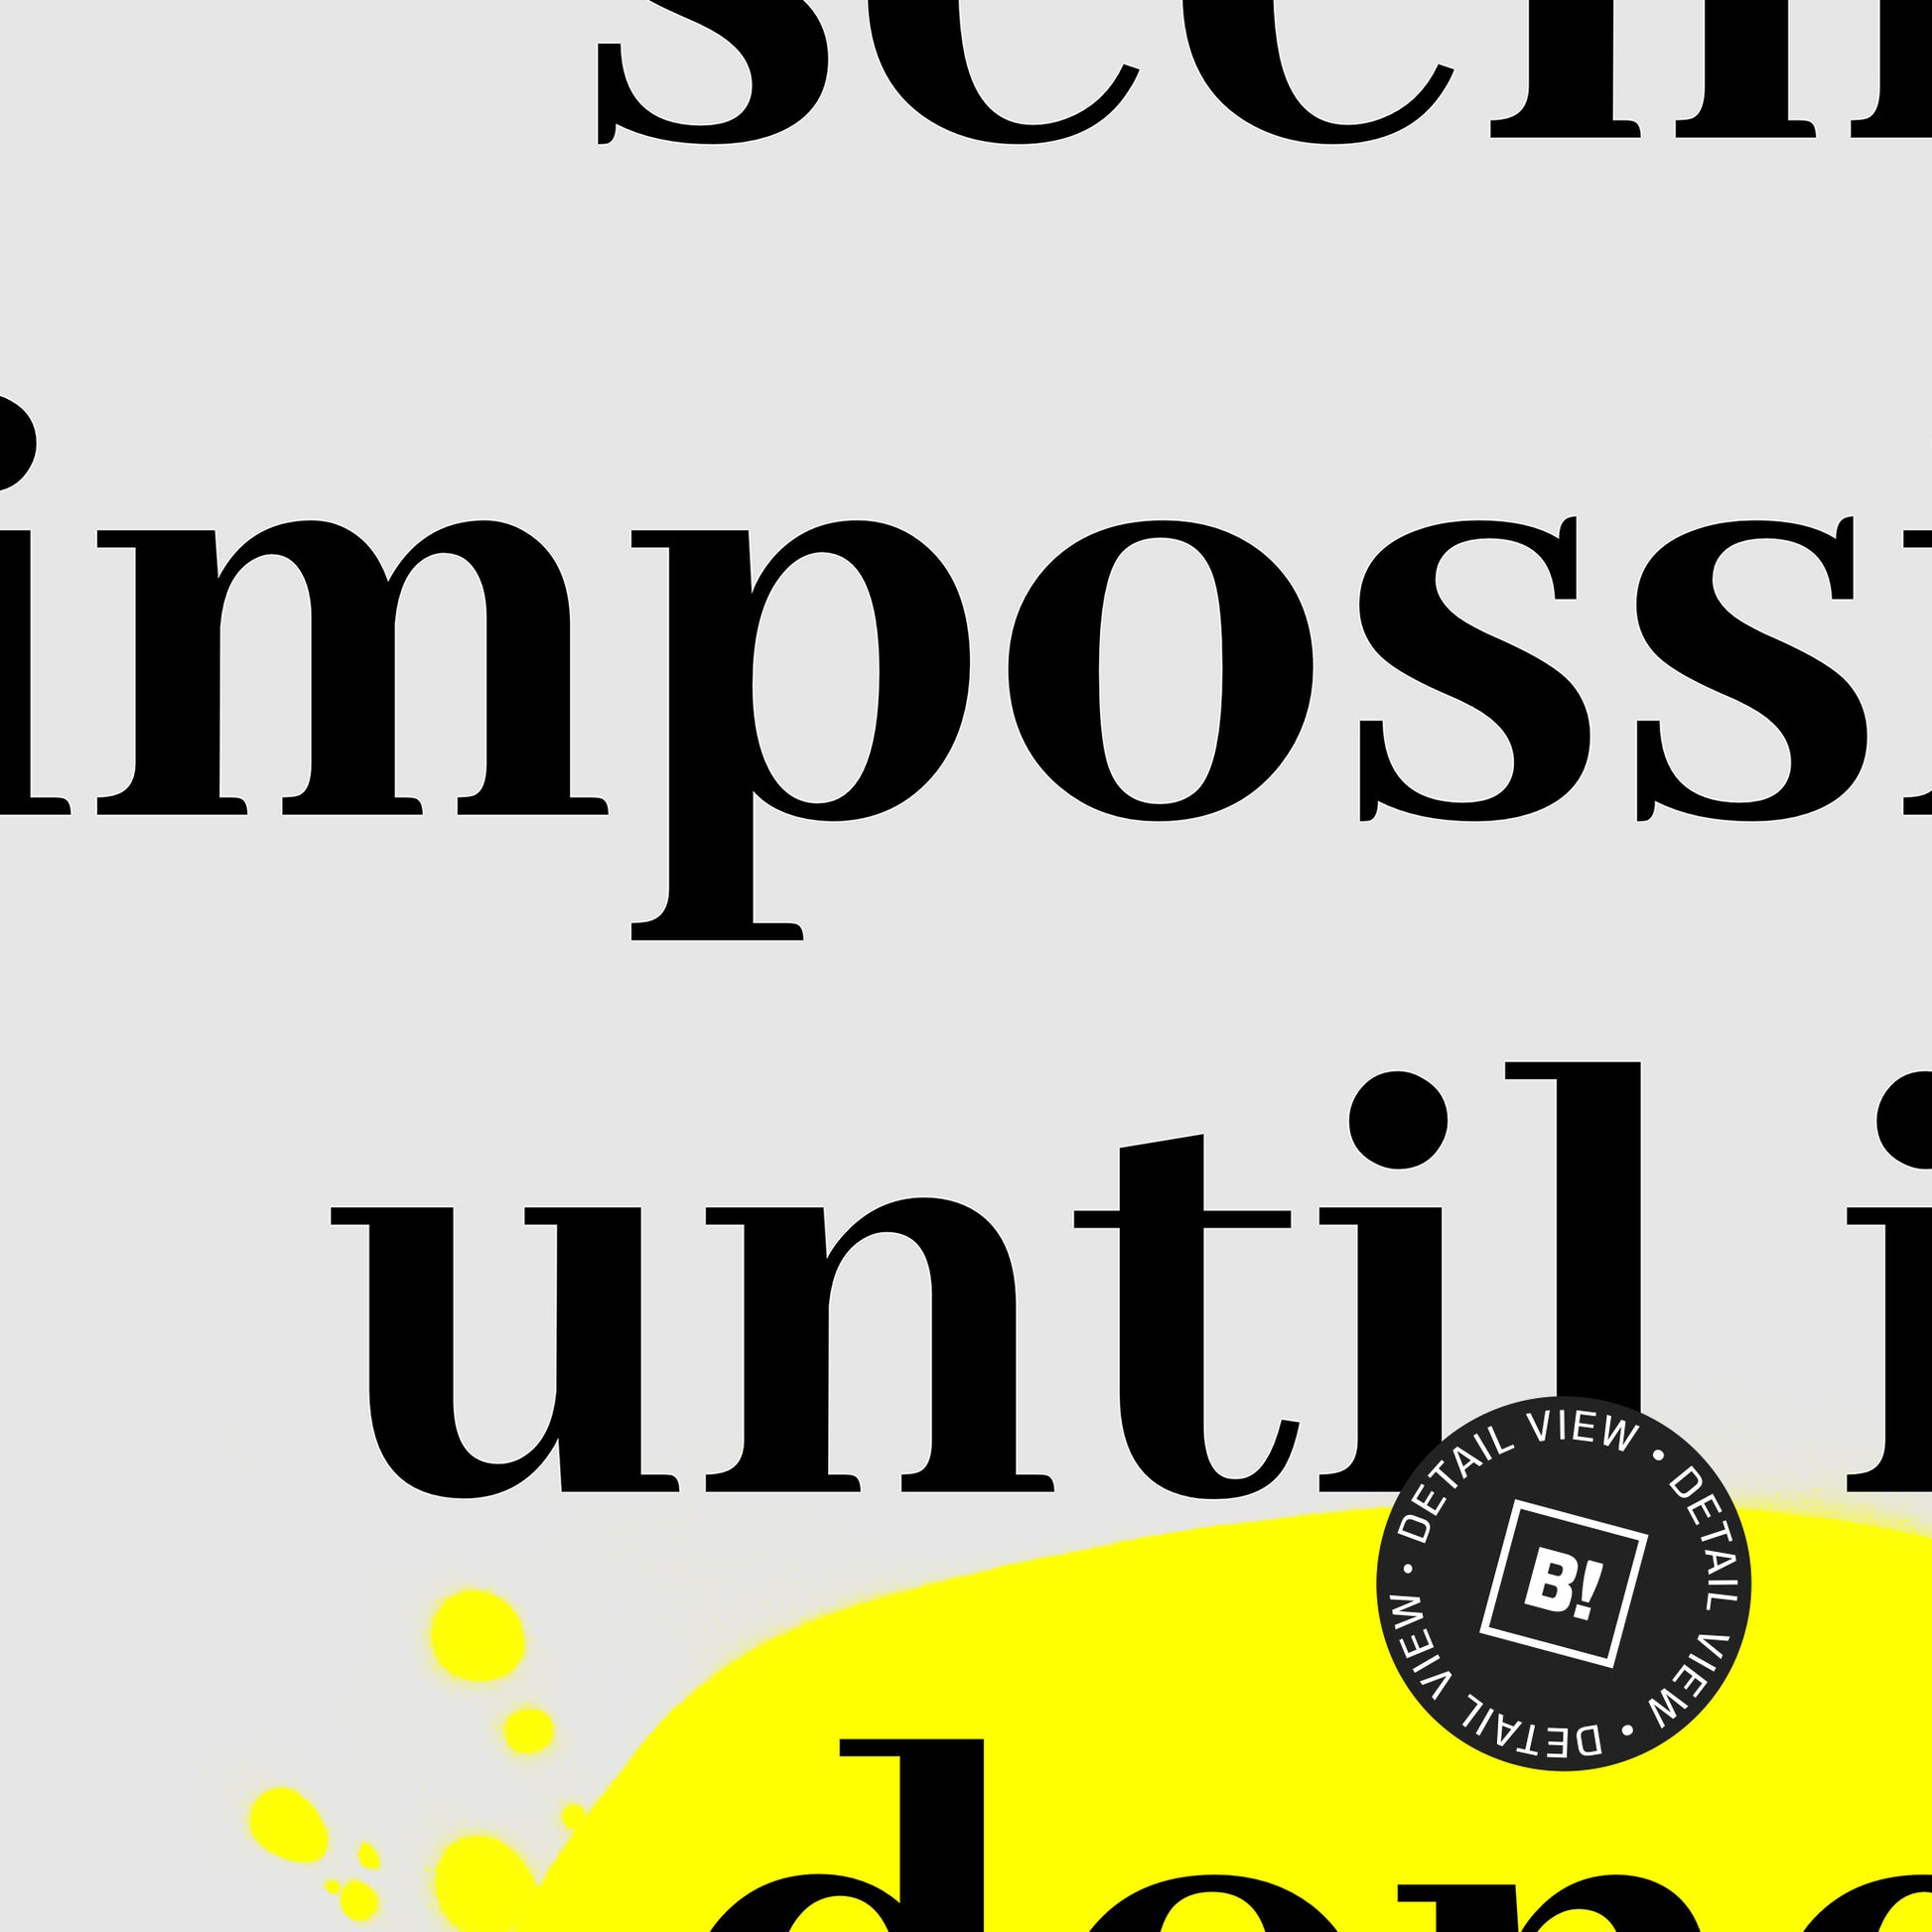 A detail view of Nelson Mandela's famous "It always seems impossible until its done" quote art print. This artwork was printed using the giclée process on archival acid-free paper and shows its timeless beauty in every detail.